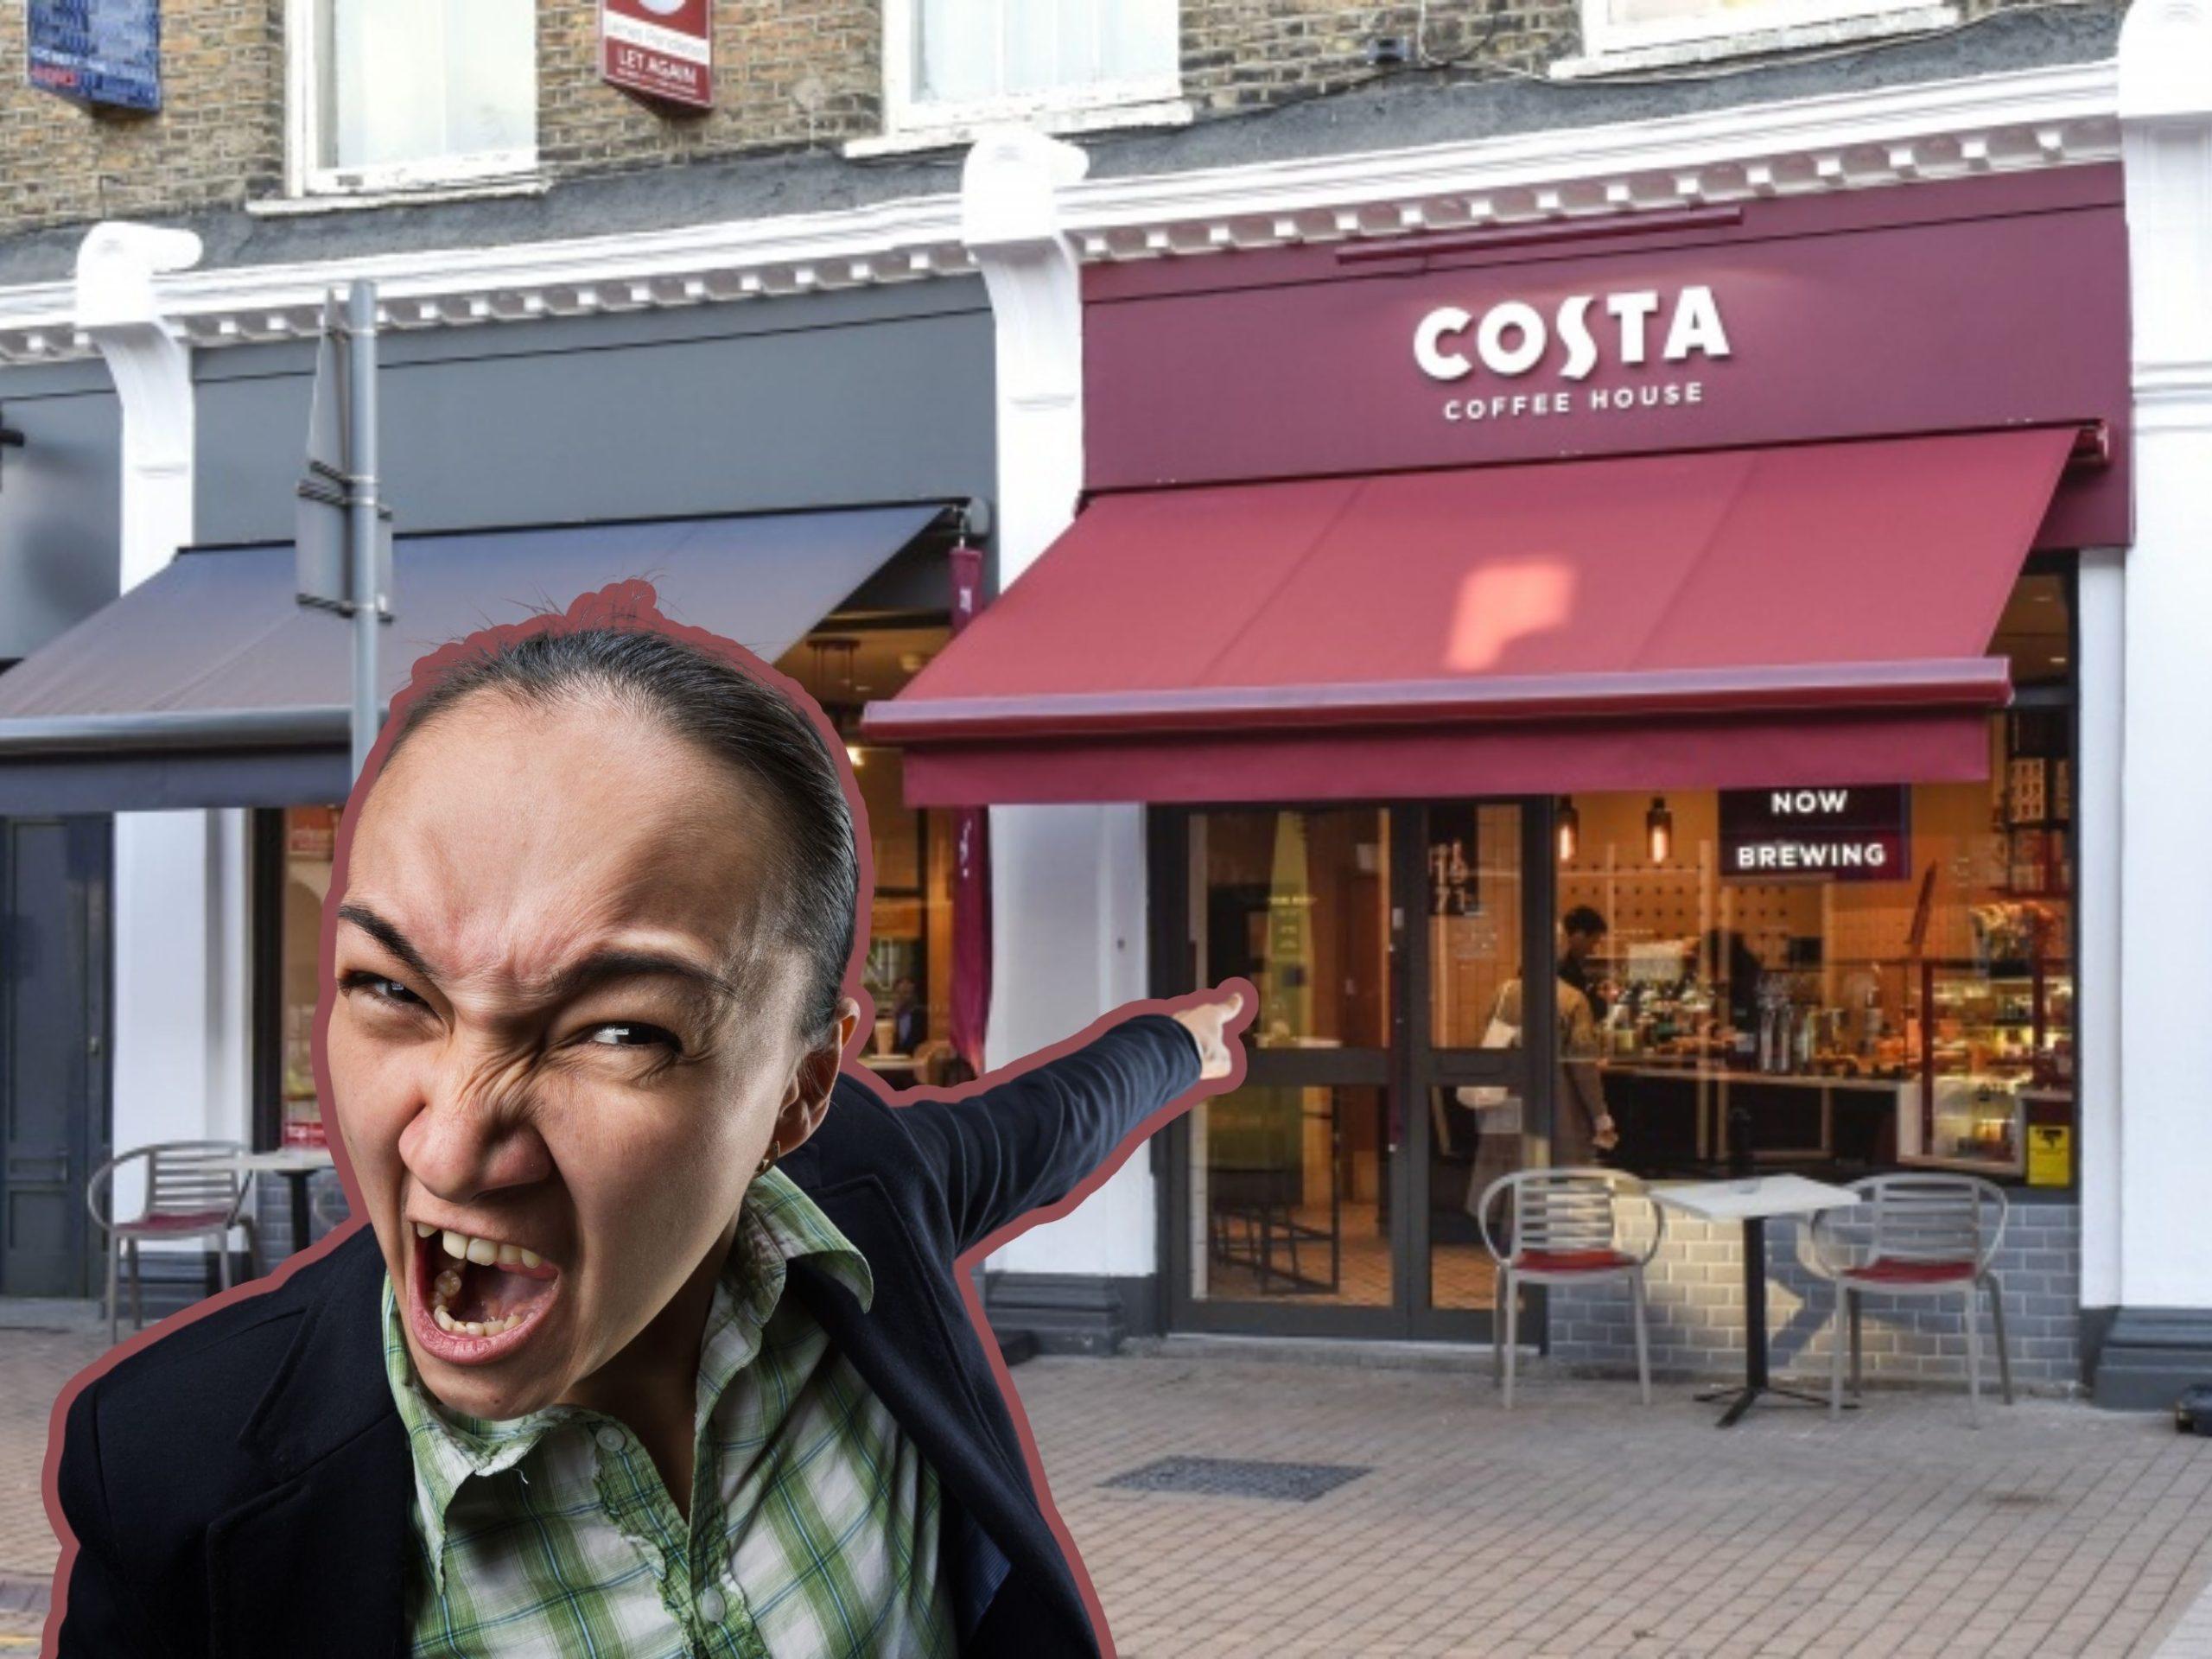 Costa Coffee Russia Boycott: The Coca-Cola Company (owners of Costa Coffee) Suspends its Business in Russia, but Costa keeps going